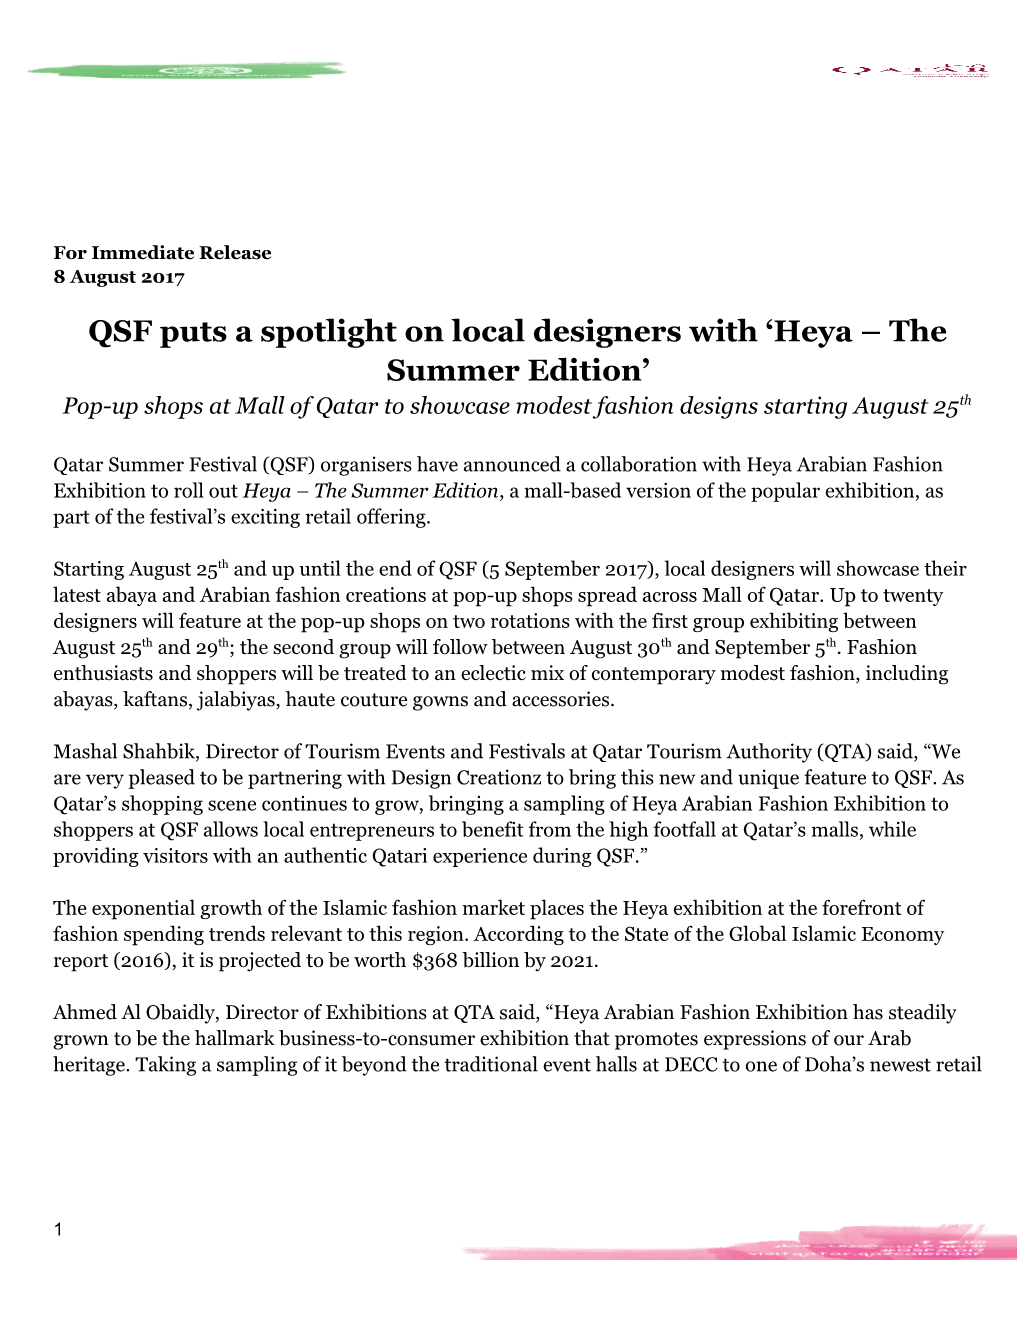 QSF Puts a Spotlight on Local Designers with Heya the Summer Edition